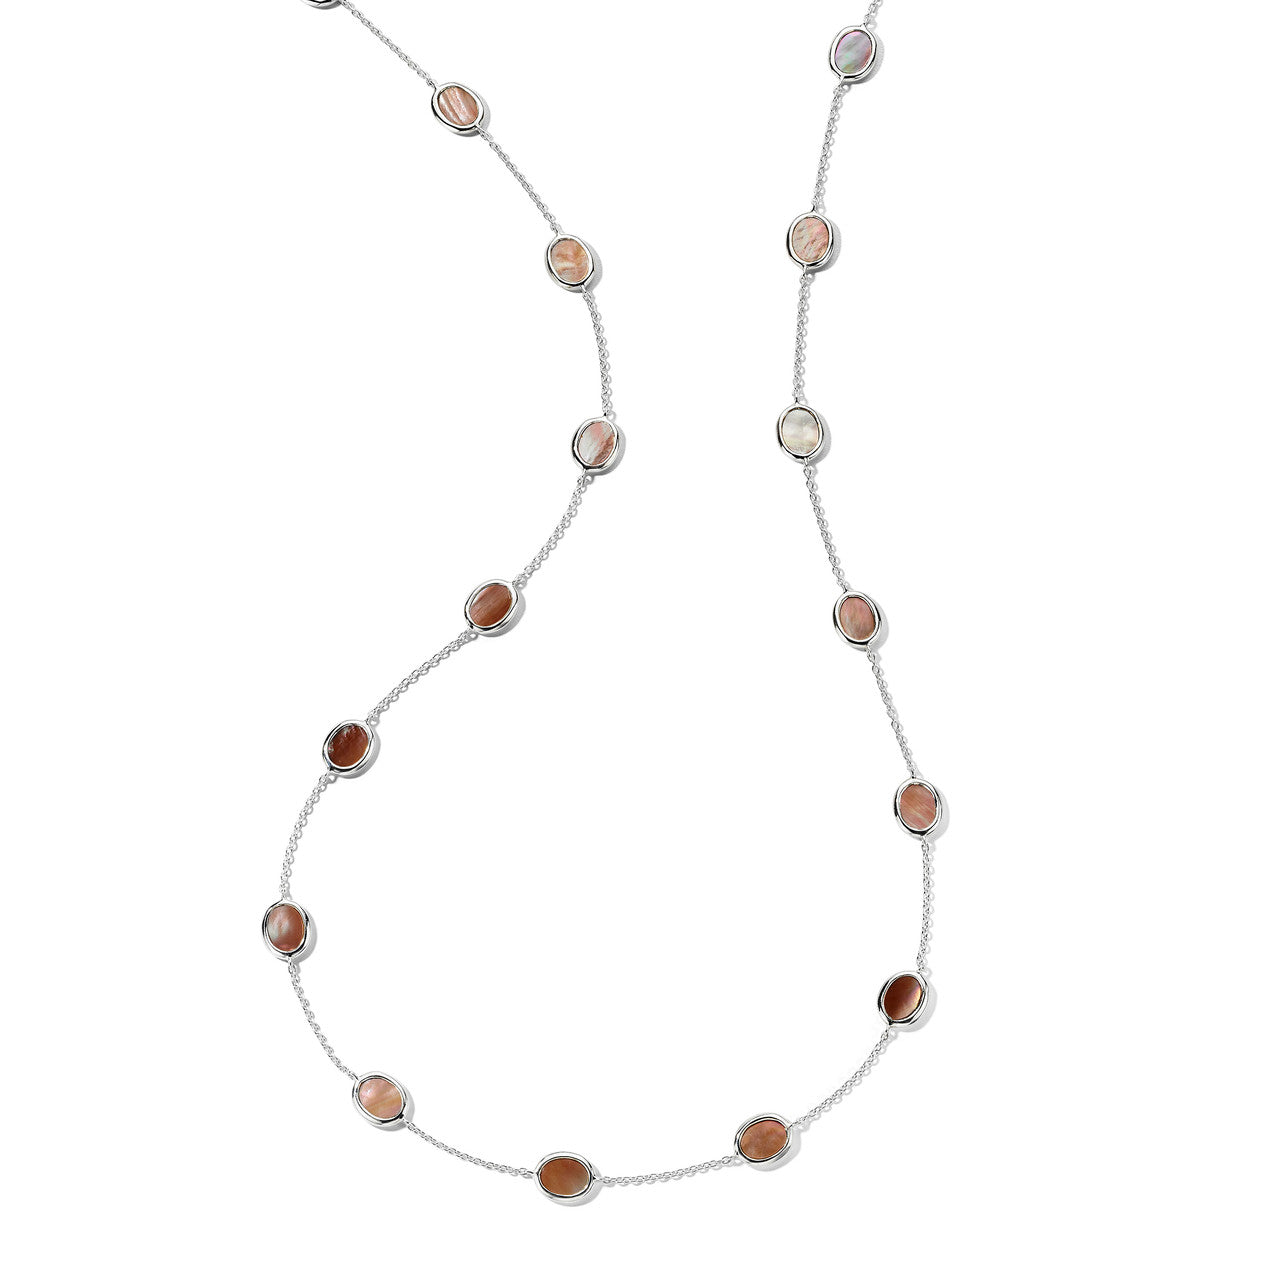 Rock Candy Long Confetti Necklace in Brown Shell